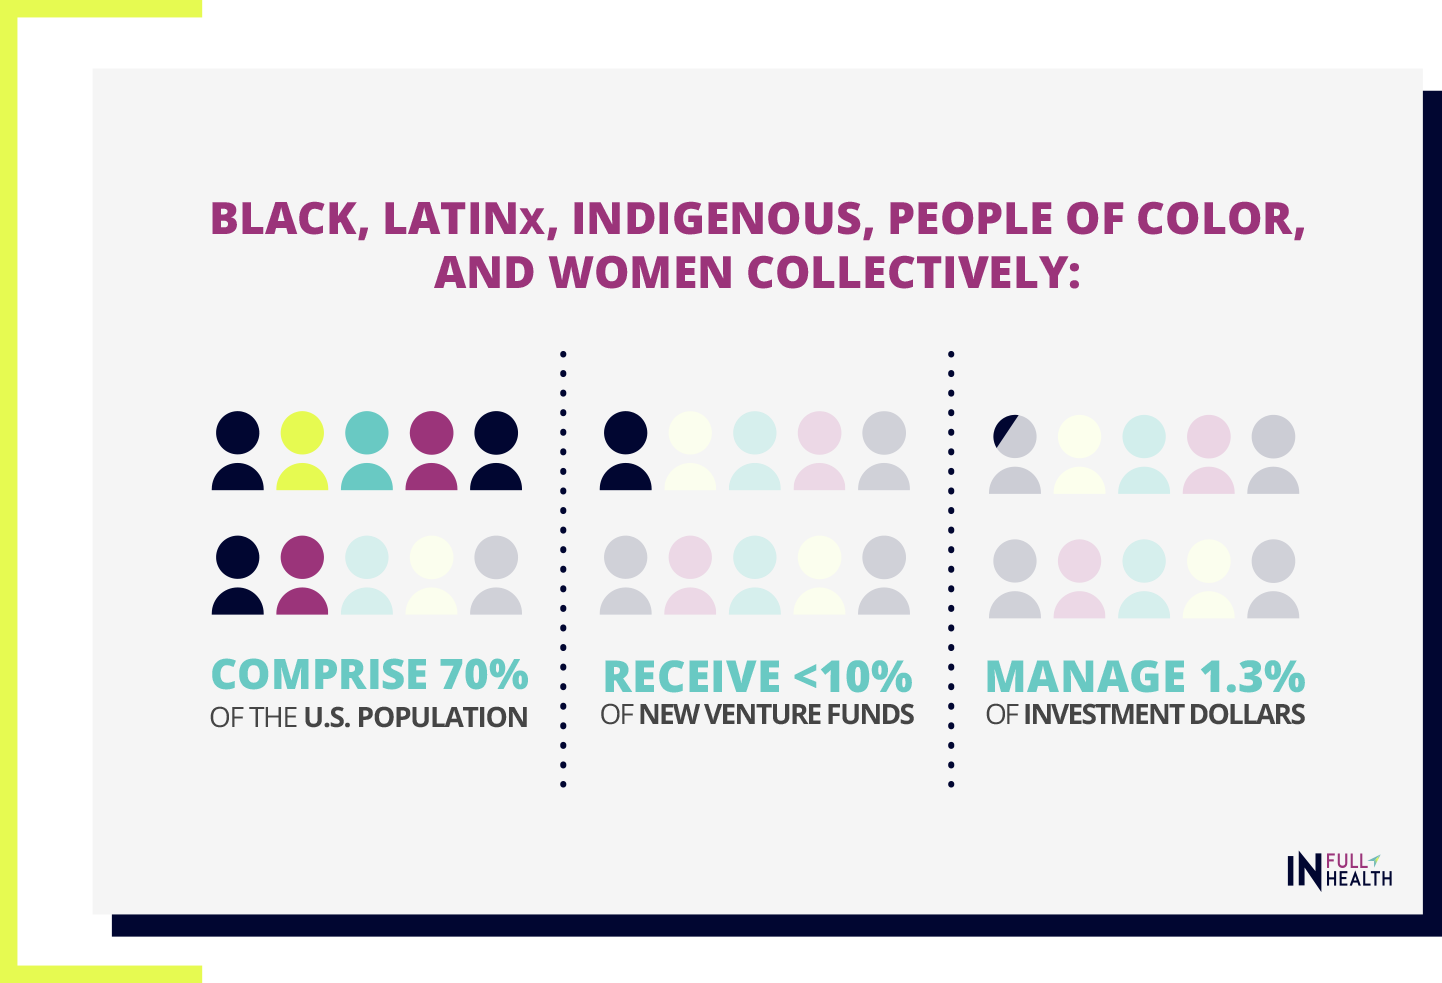 Black, Latinx, Indigenous, people of color, and women comprise 70% of the population but are underrepresented in venture and money management.